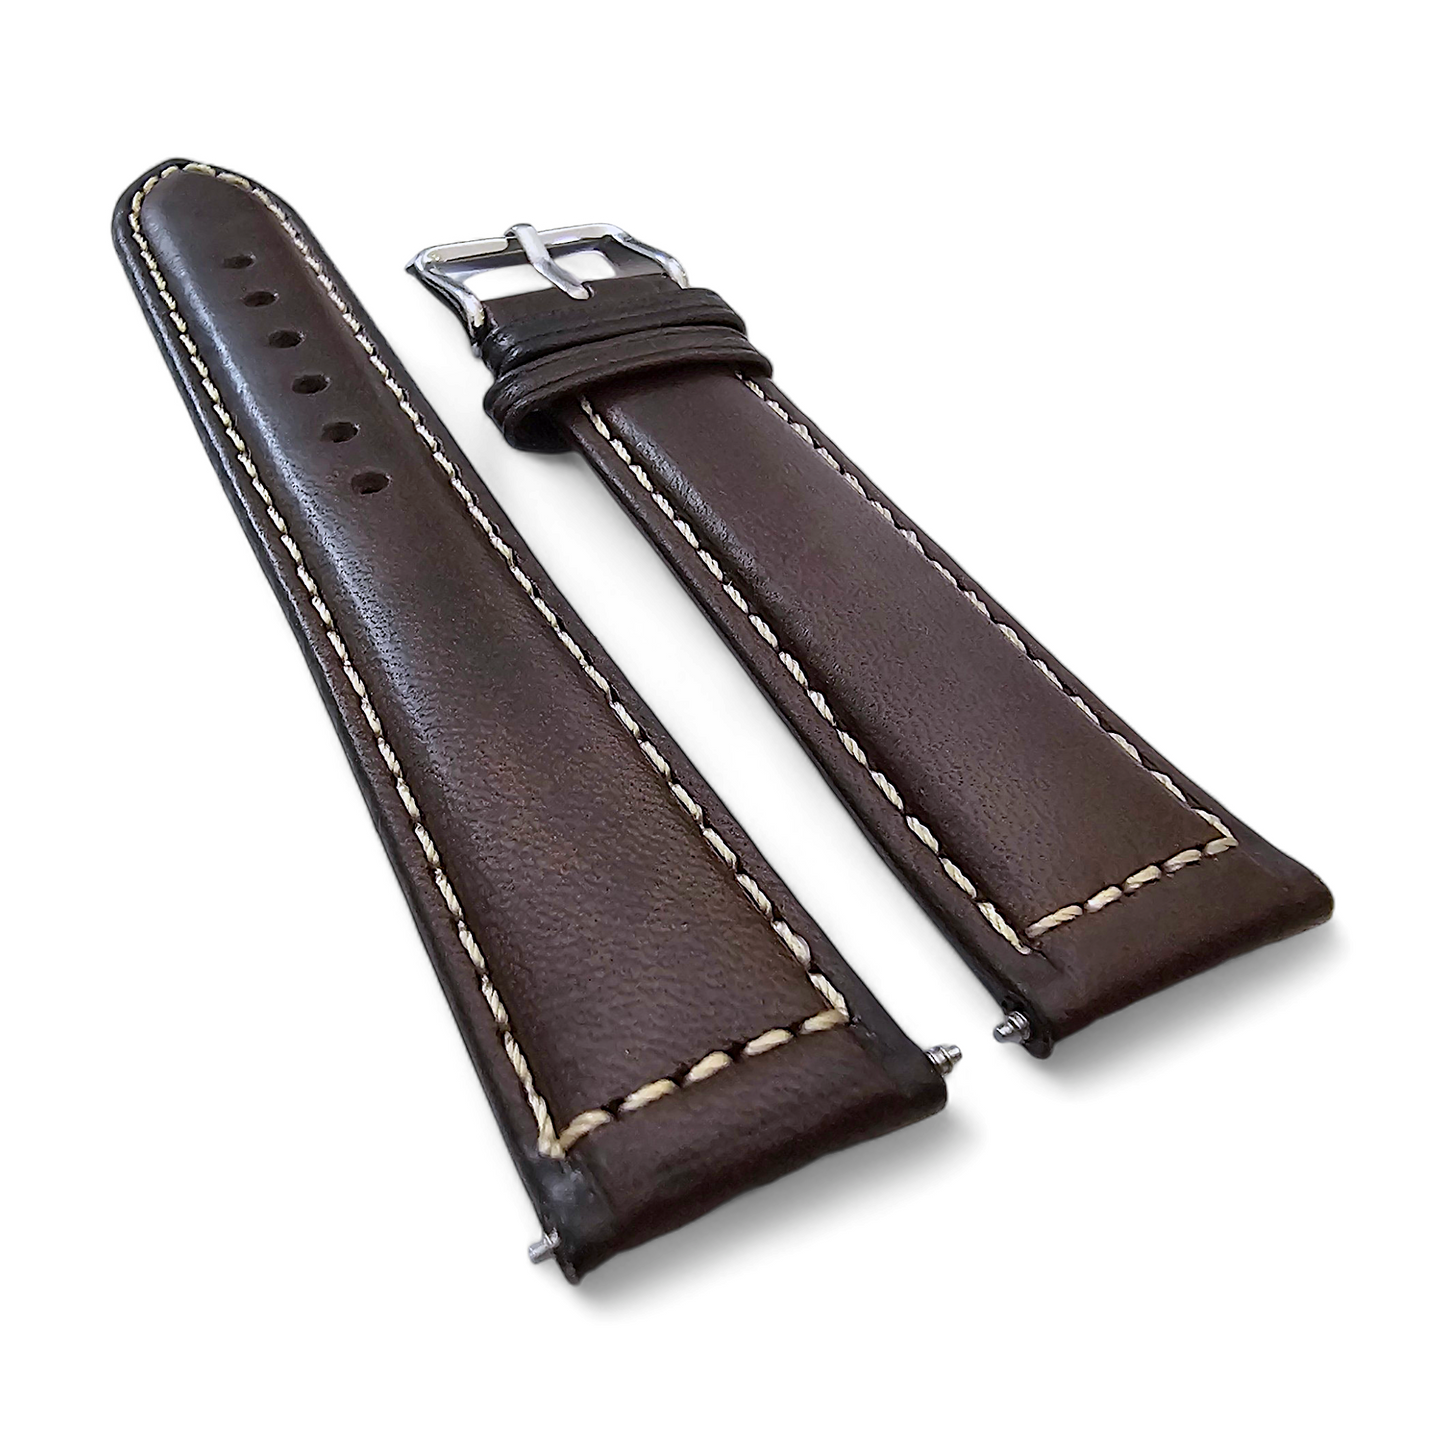 Italian Leather Classic Padded Watch Strap Band 18mm 20mm 22mm Dark Chocolate Brown